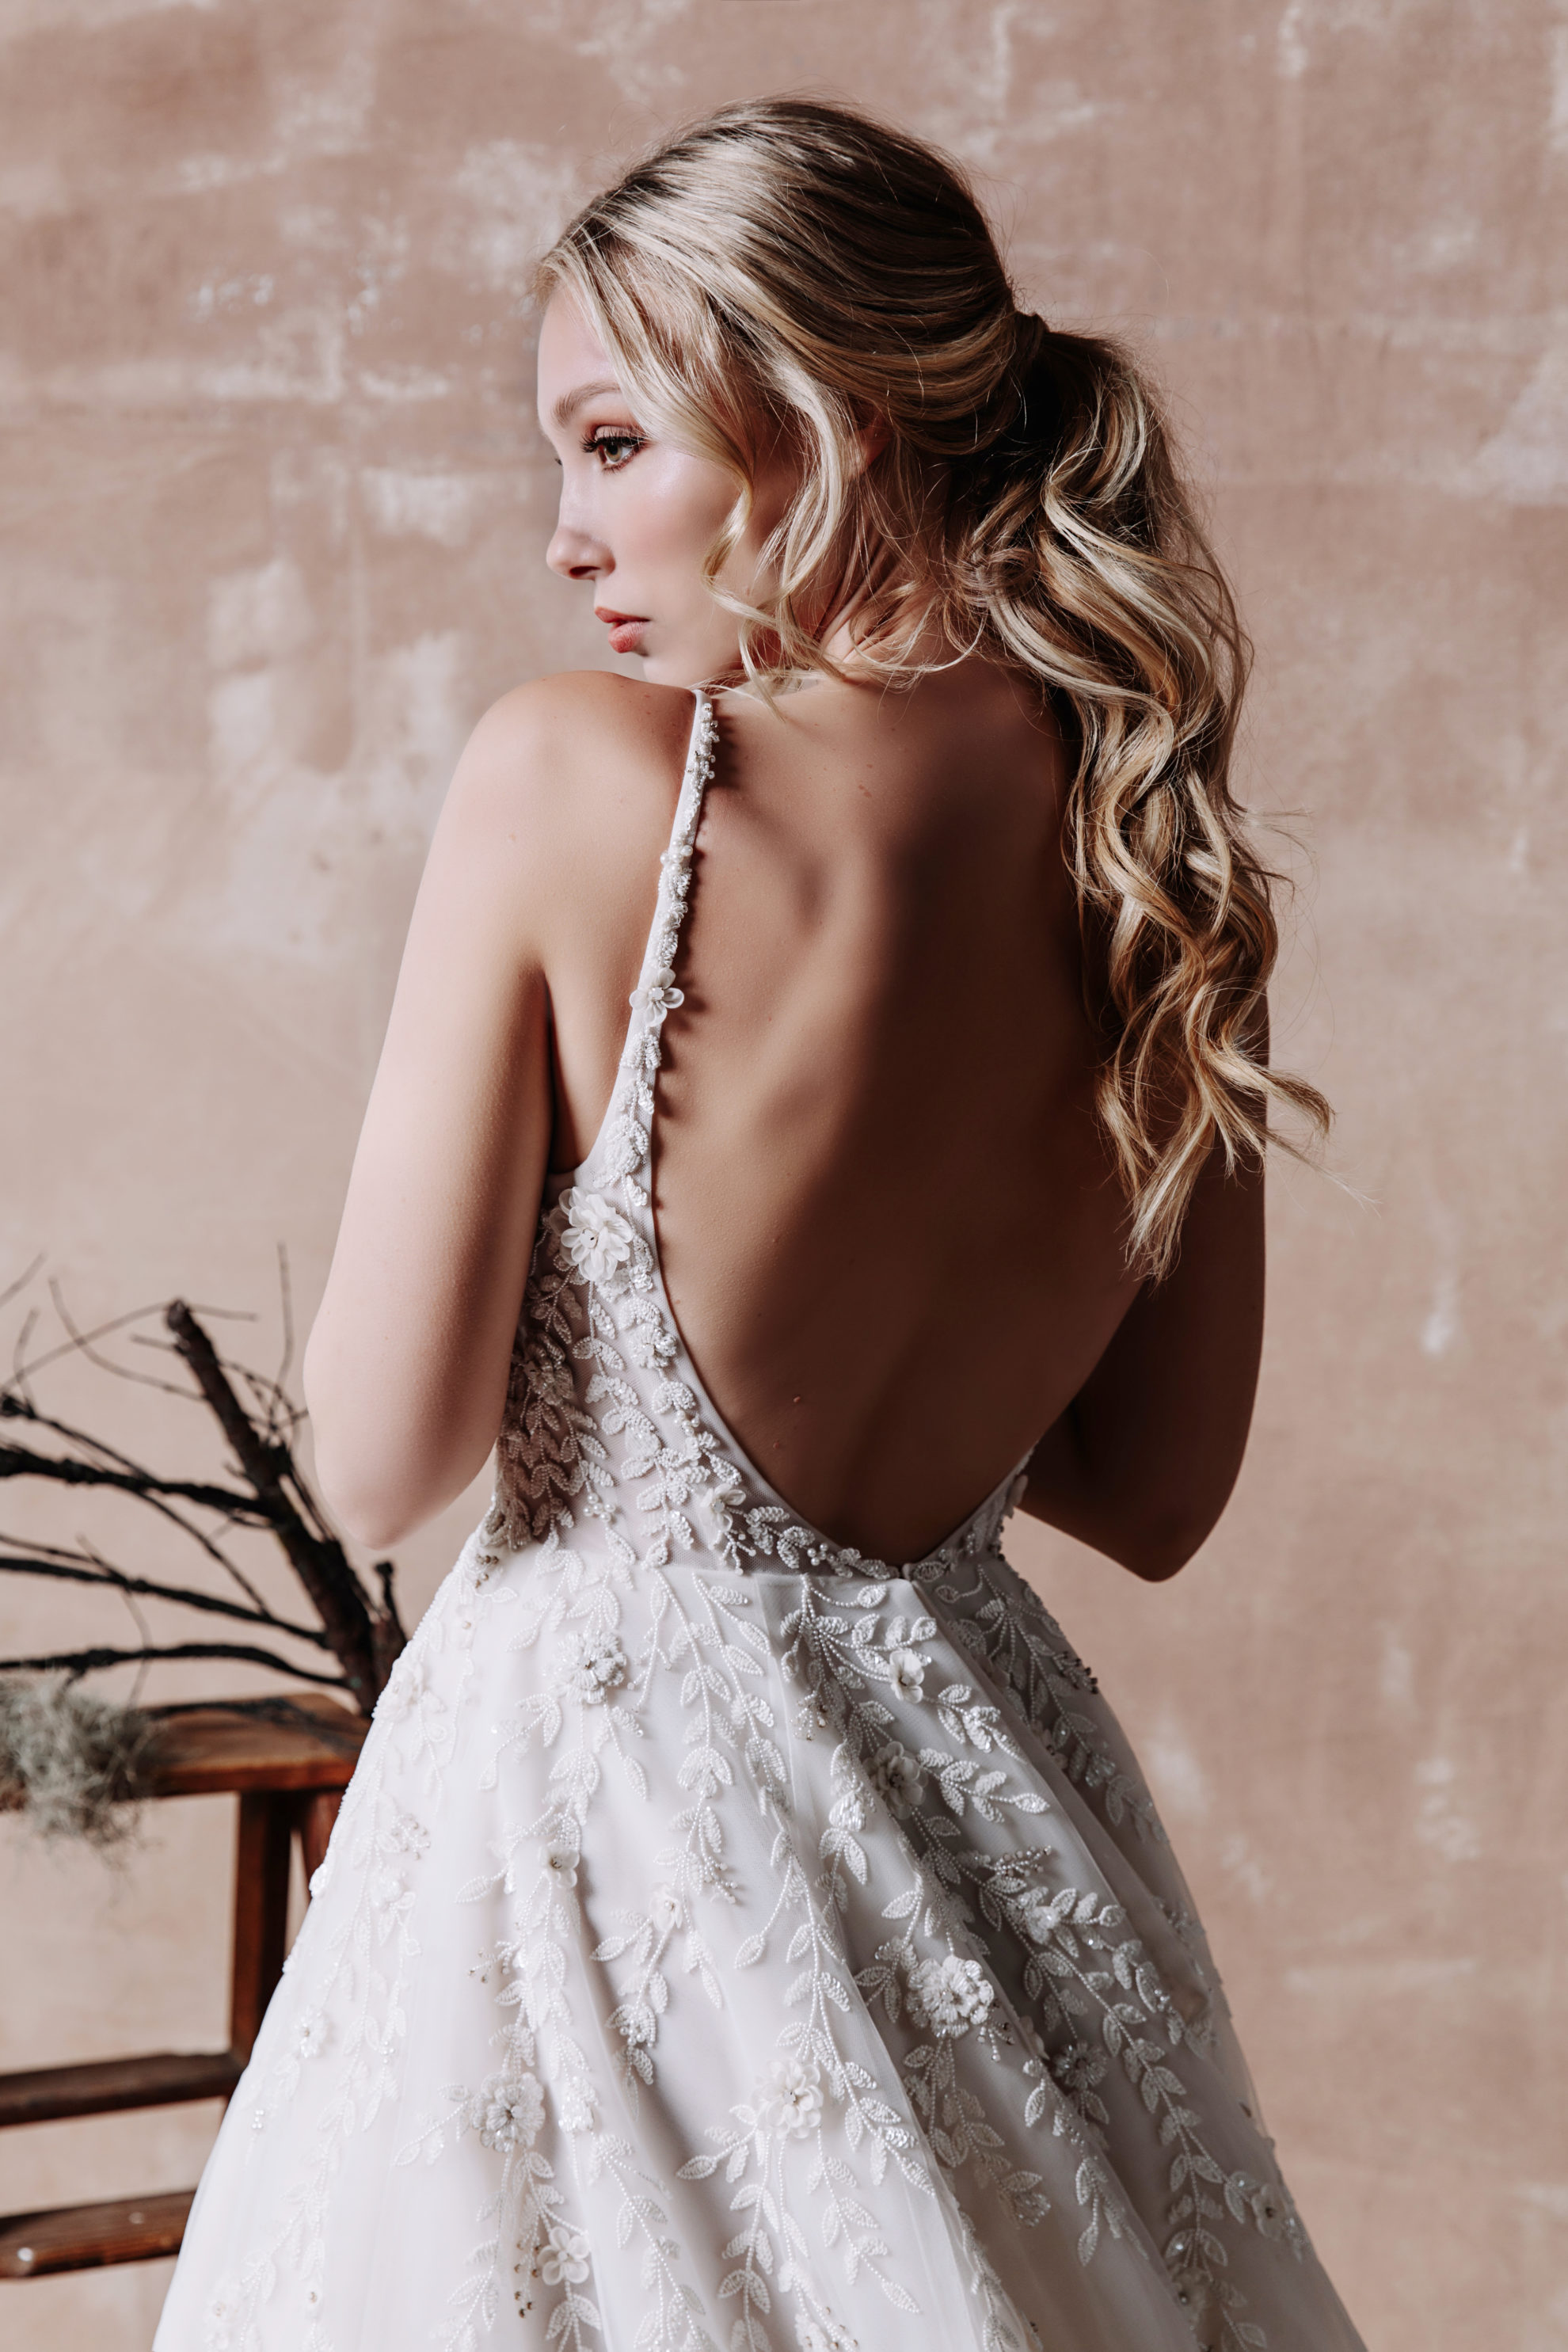 Back Pose in wedding gown